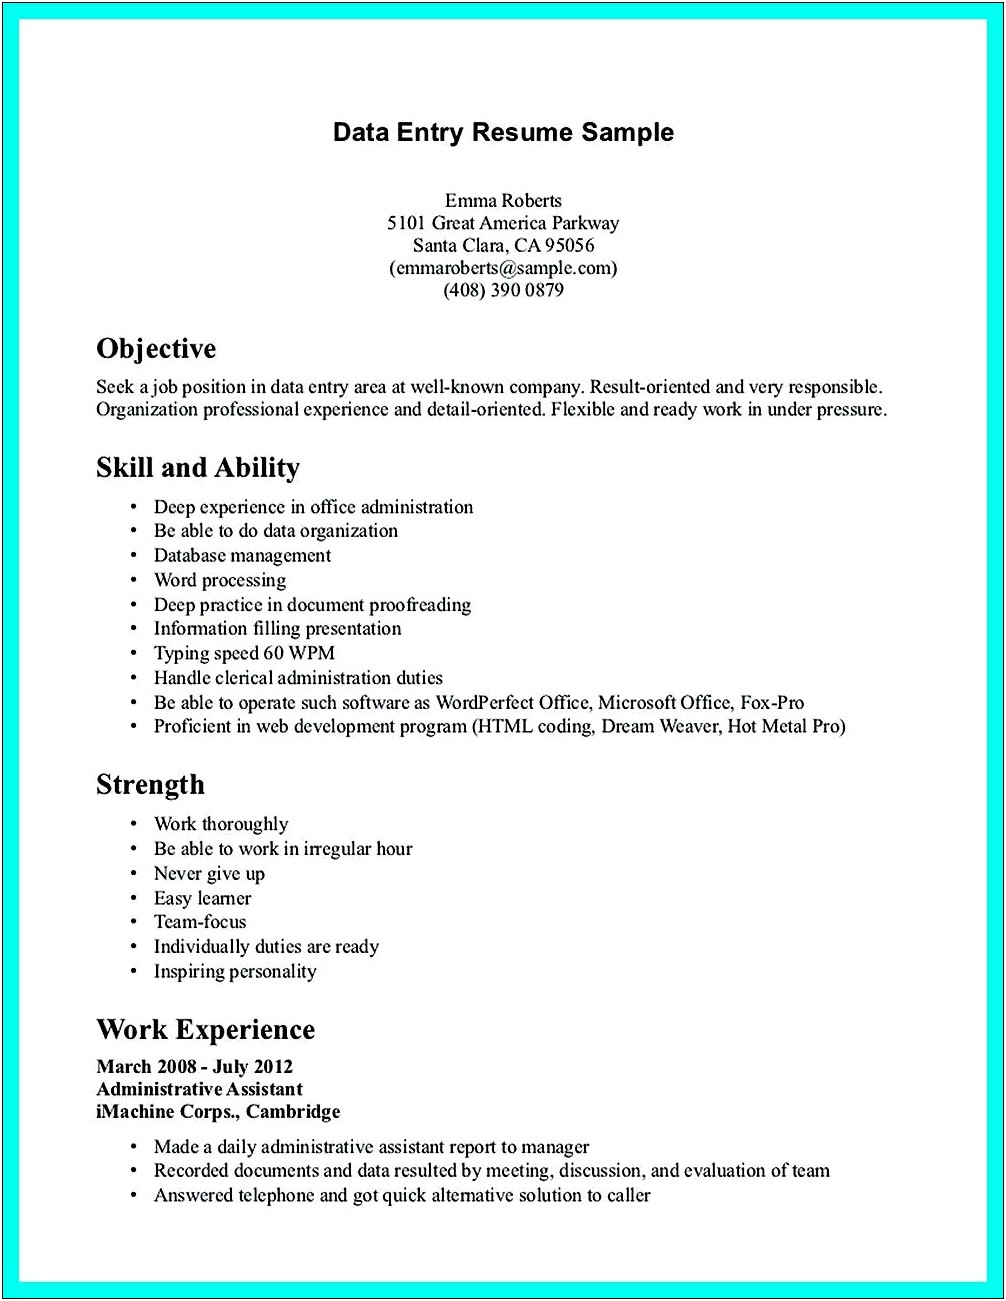 Free Sample Resumes For Data Entry Jobs